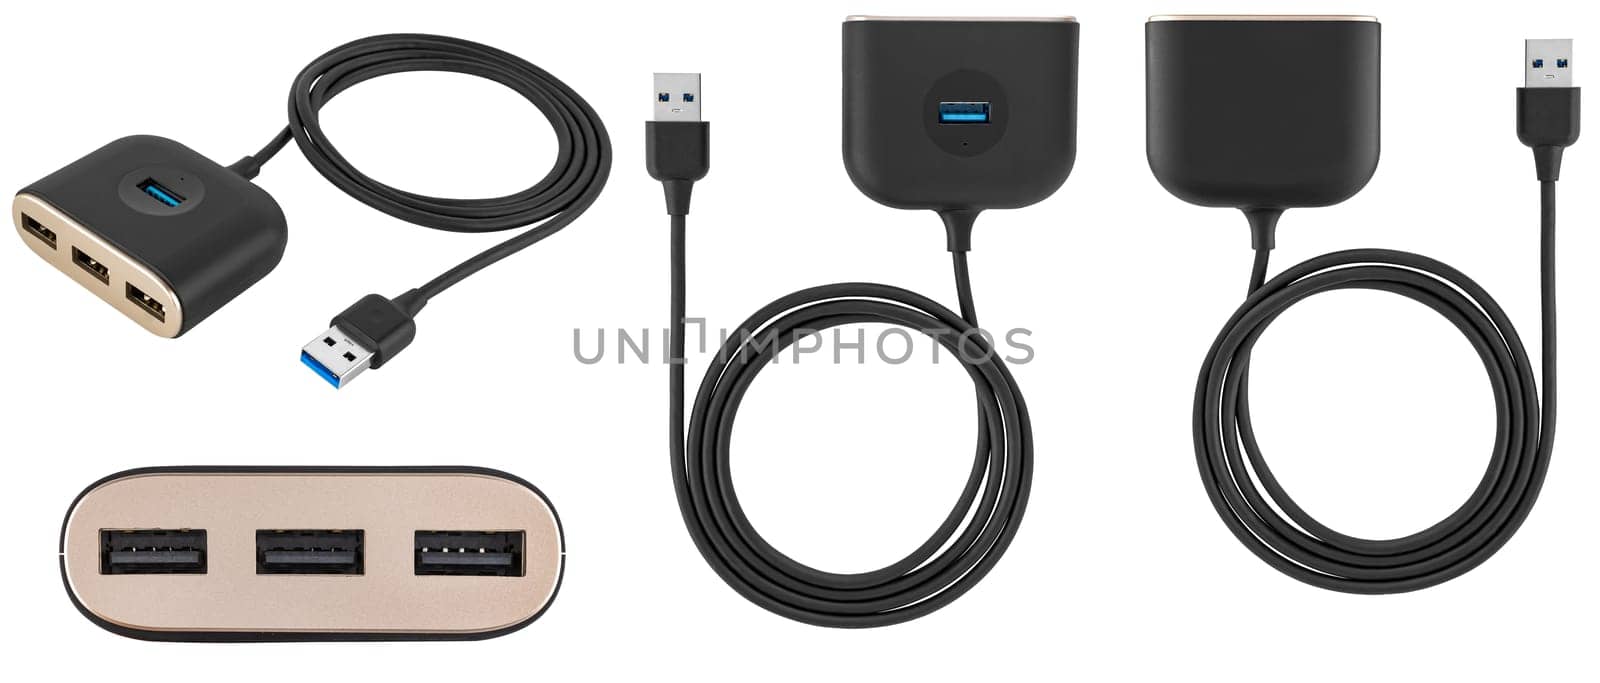 USB-C Hub multifunction station, on white background in isolation by A_A